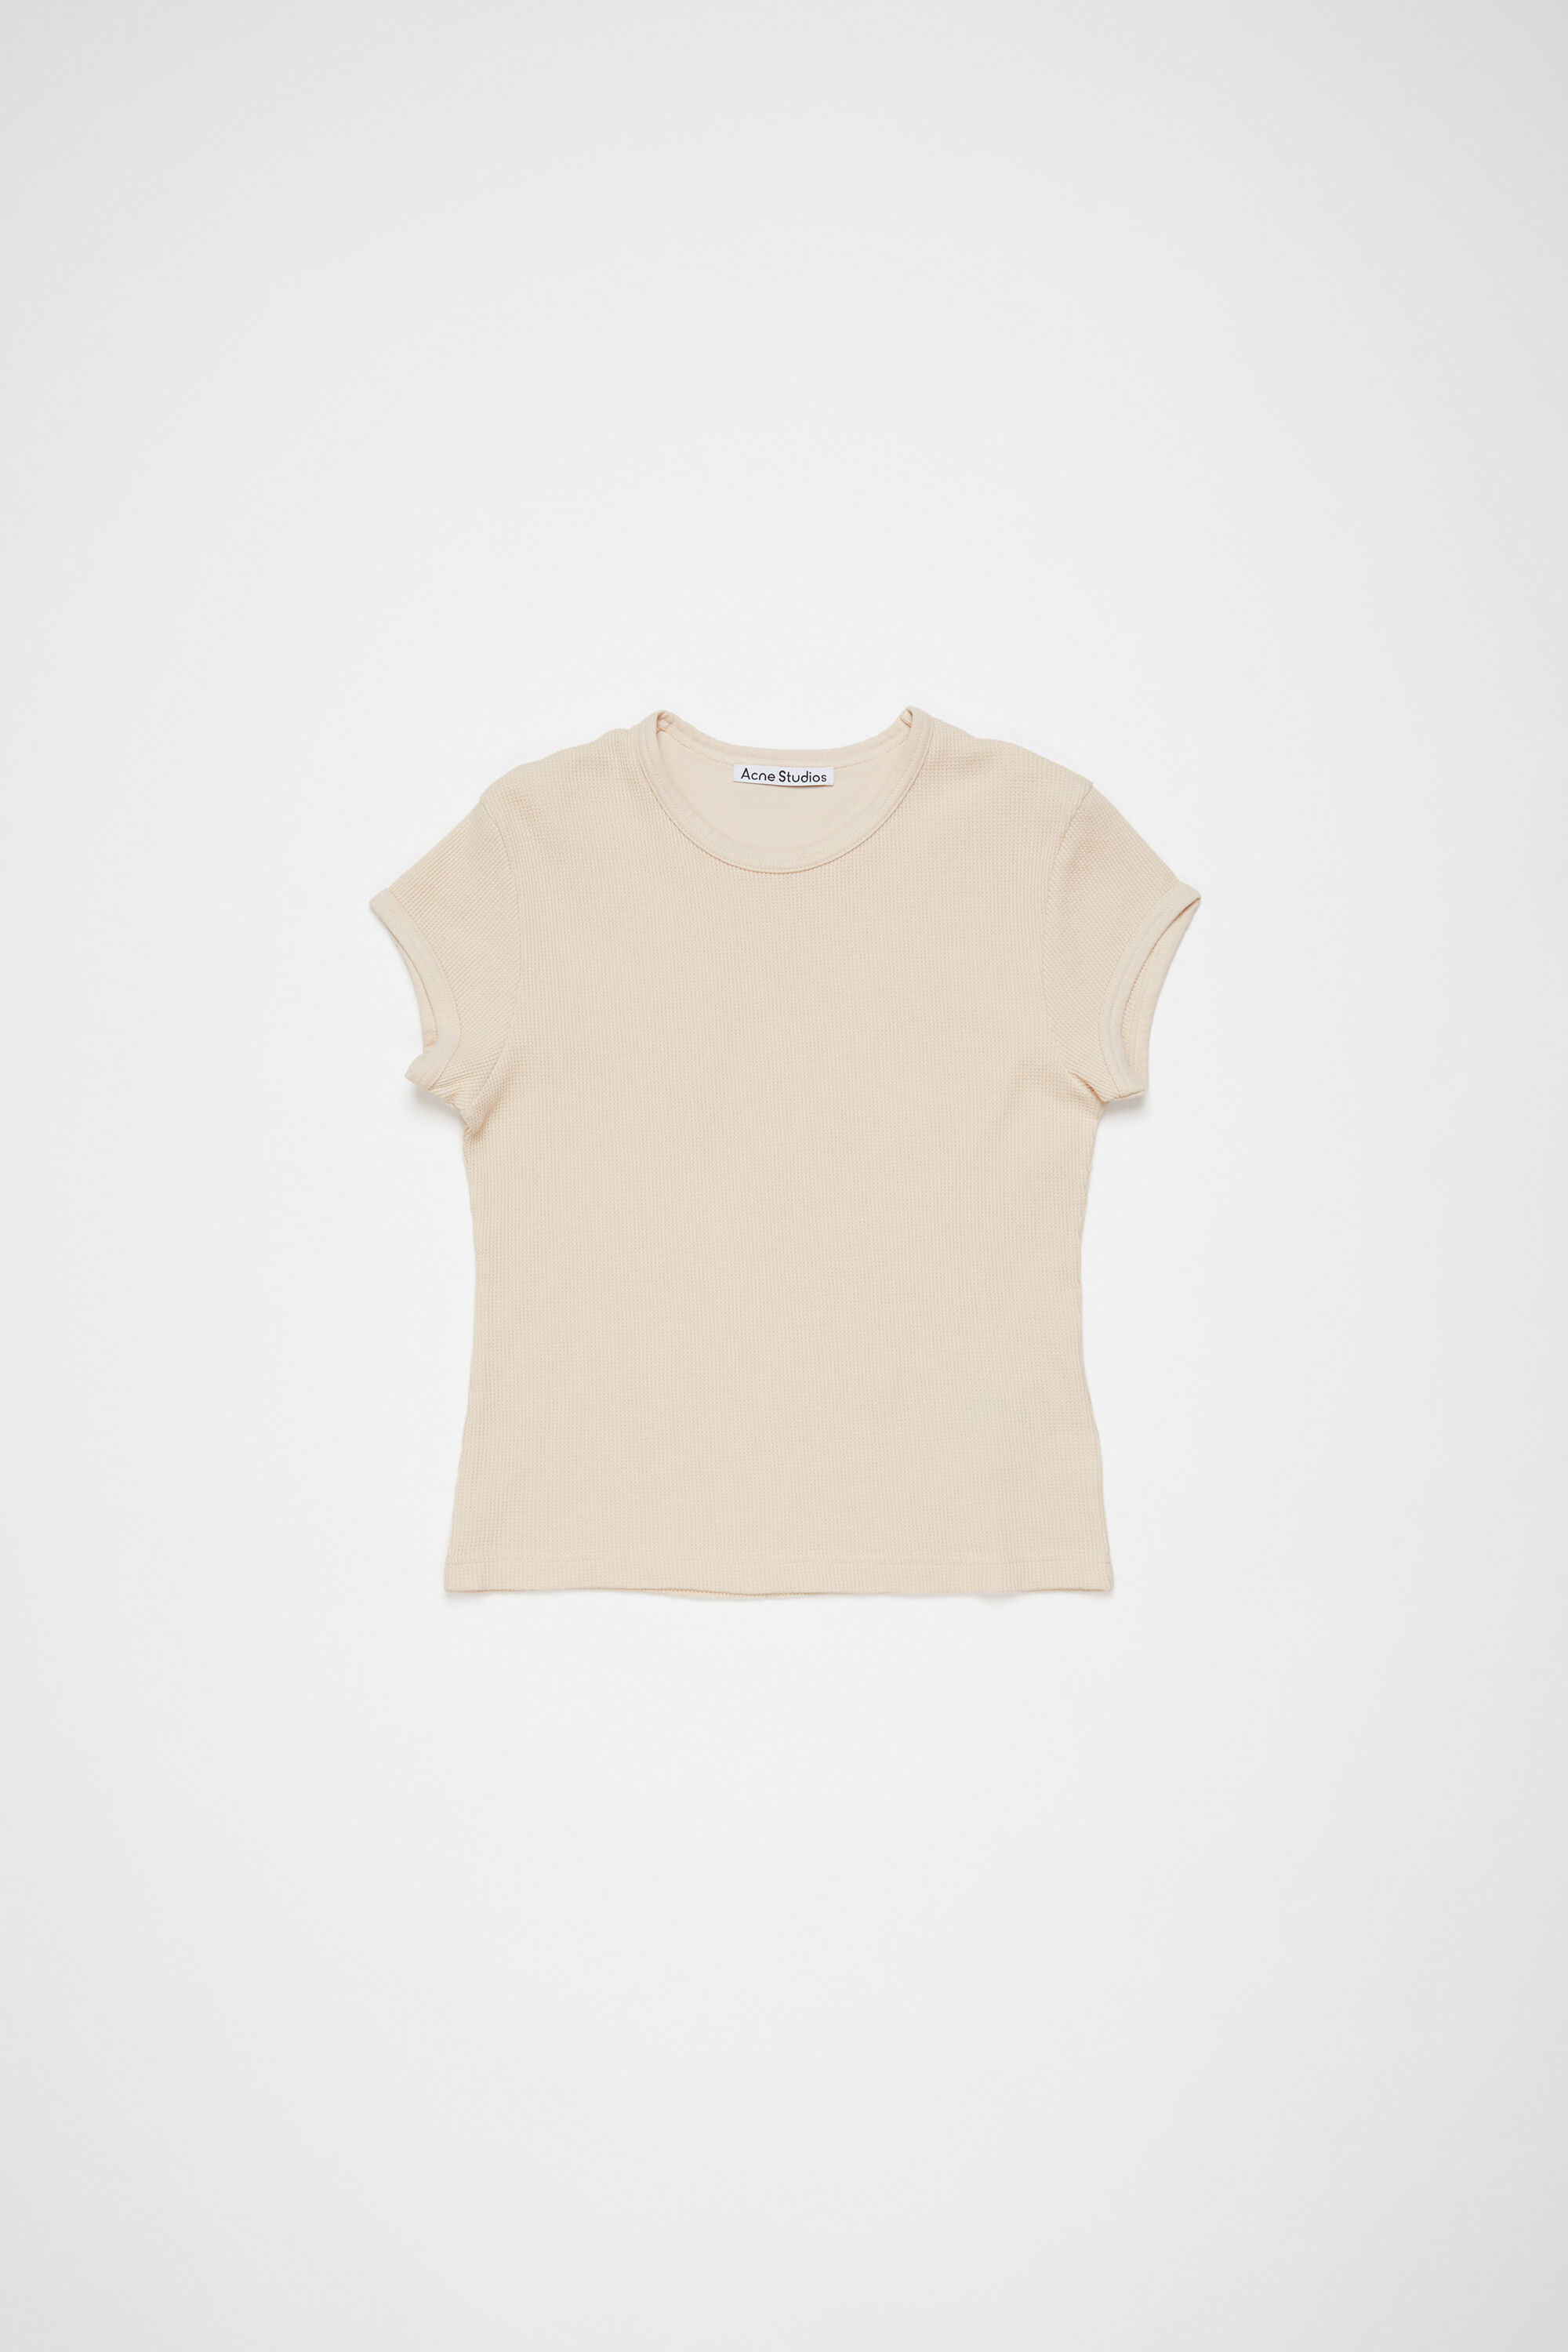 Acne Studios - T-shirt - Fitted fit - Soft pink